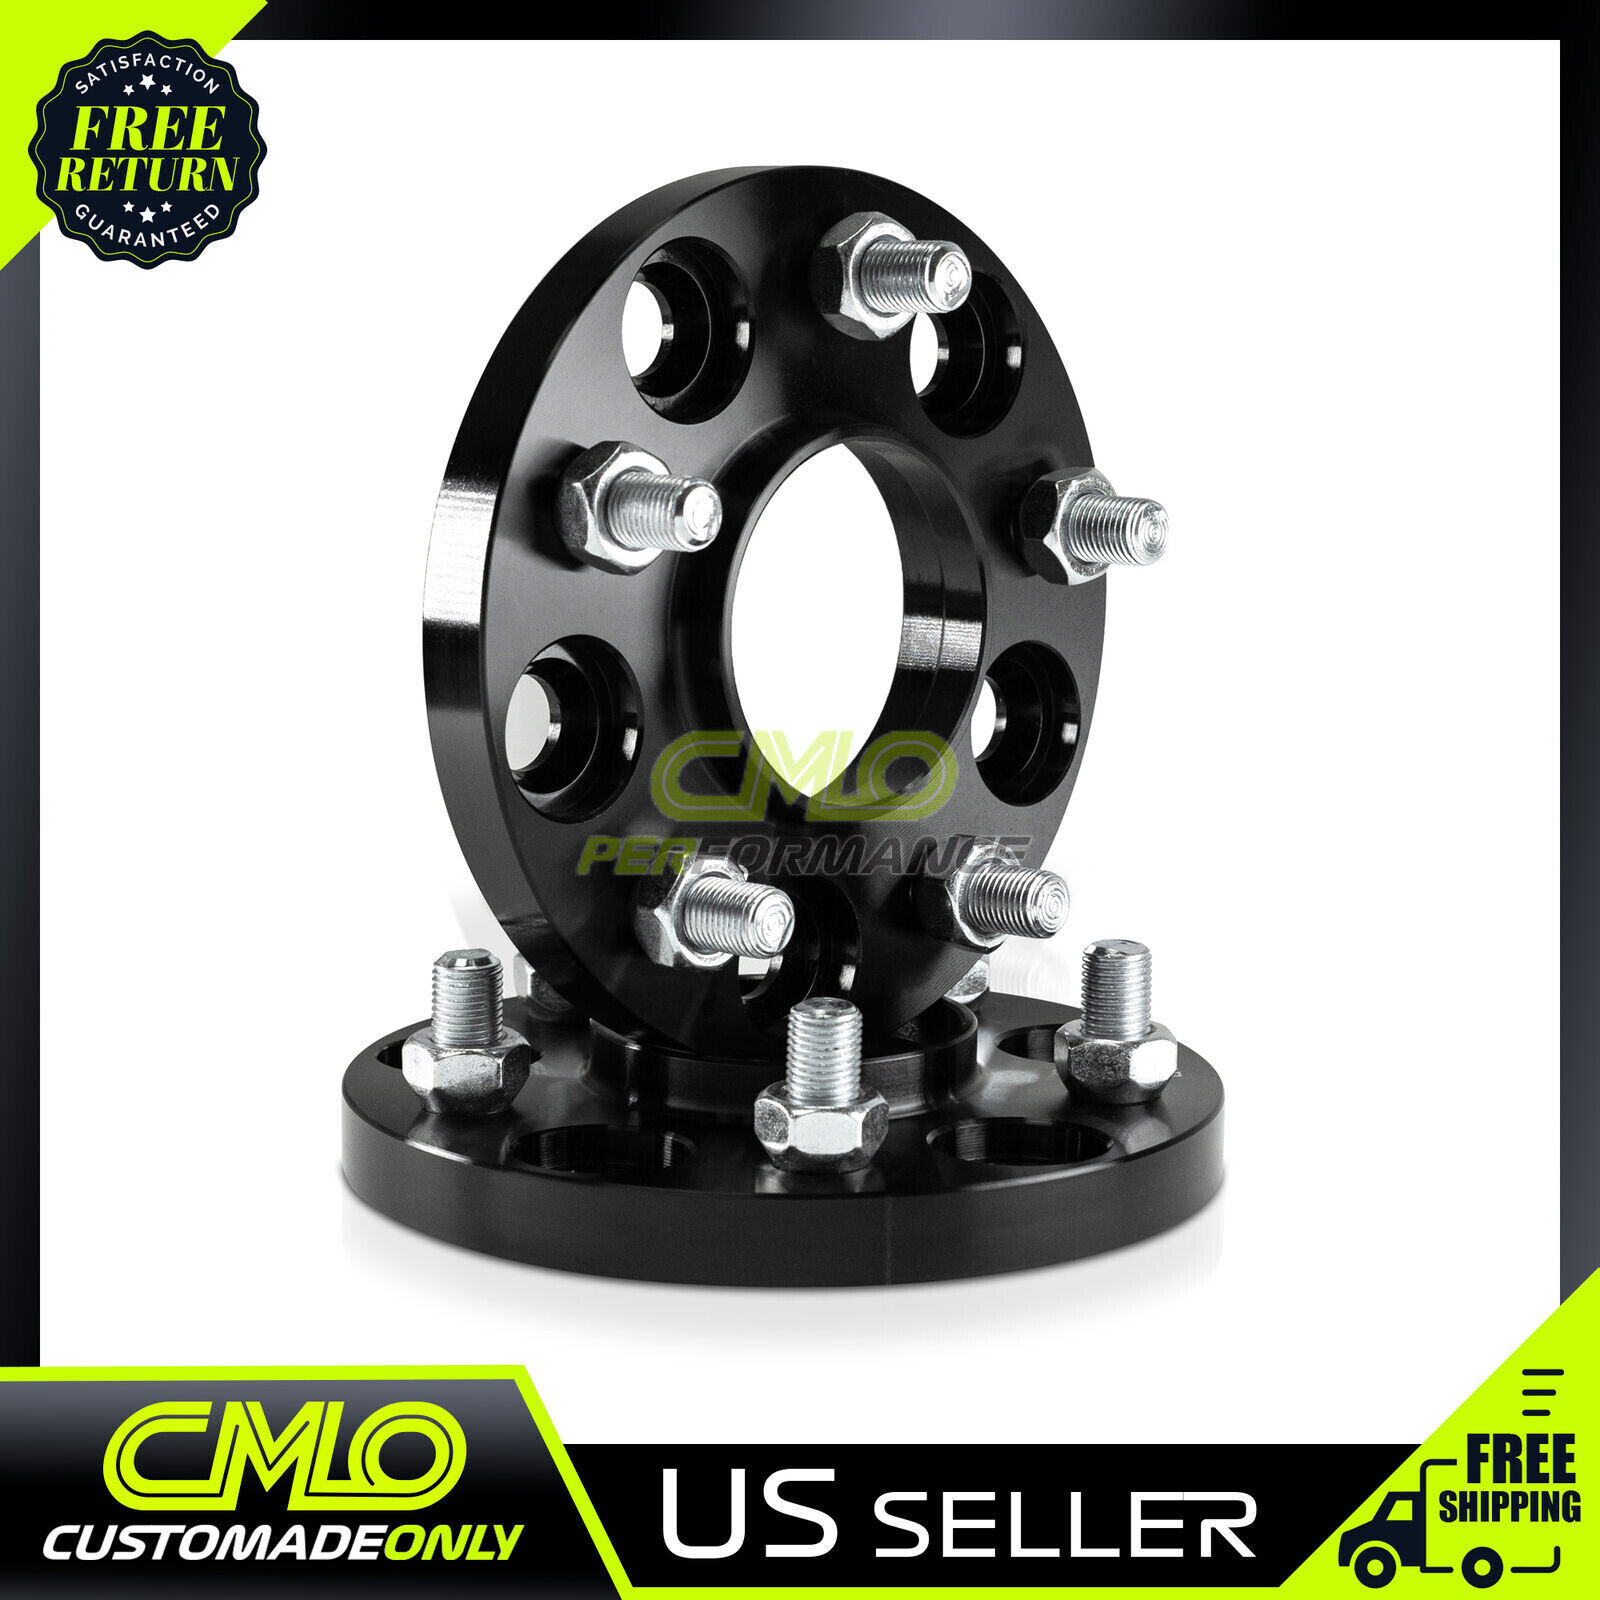 2pc 15mm Black Hubcentric Wheel Spacers 5x4.5 Fits Civic Accord S2000 RSX TSX